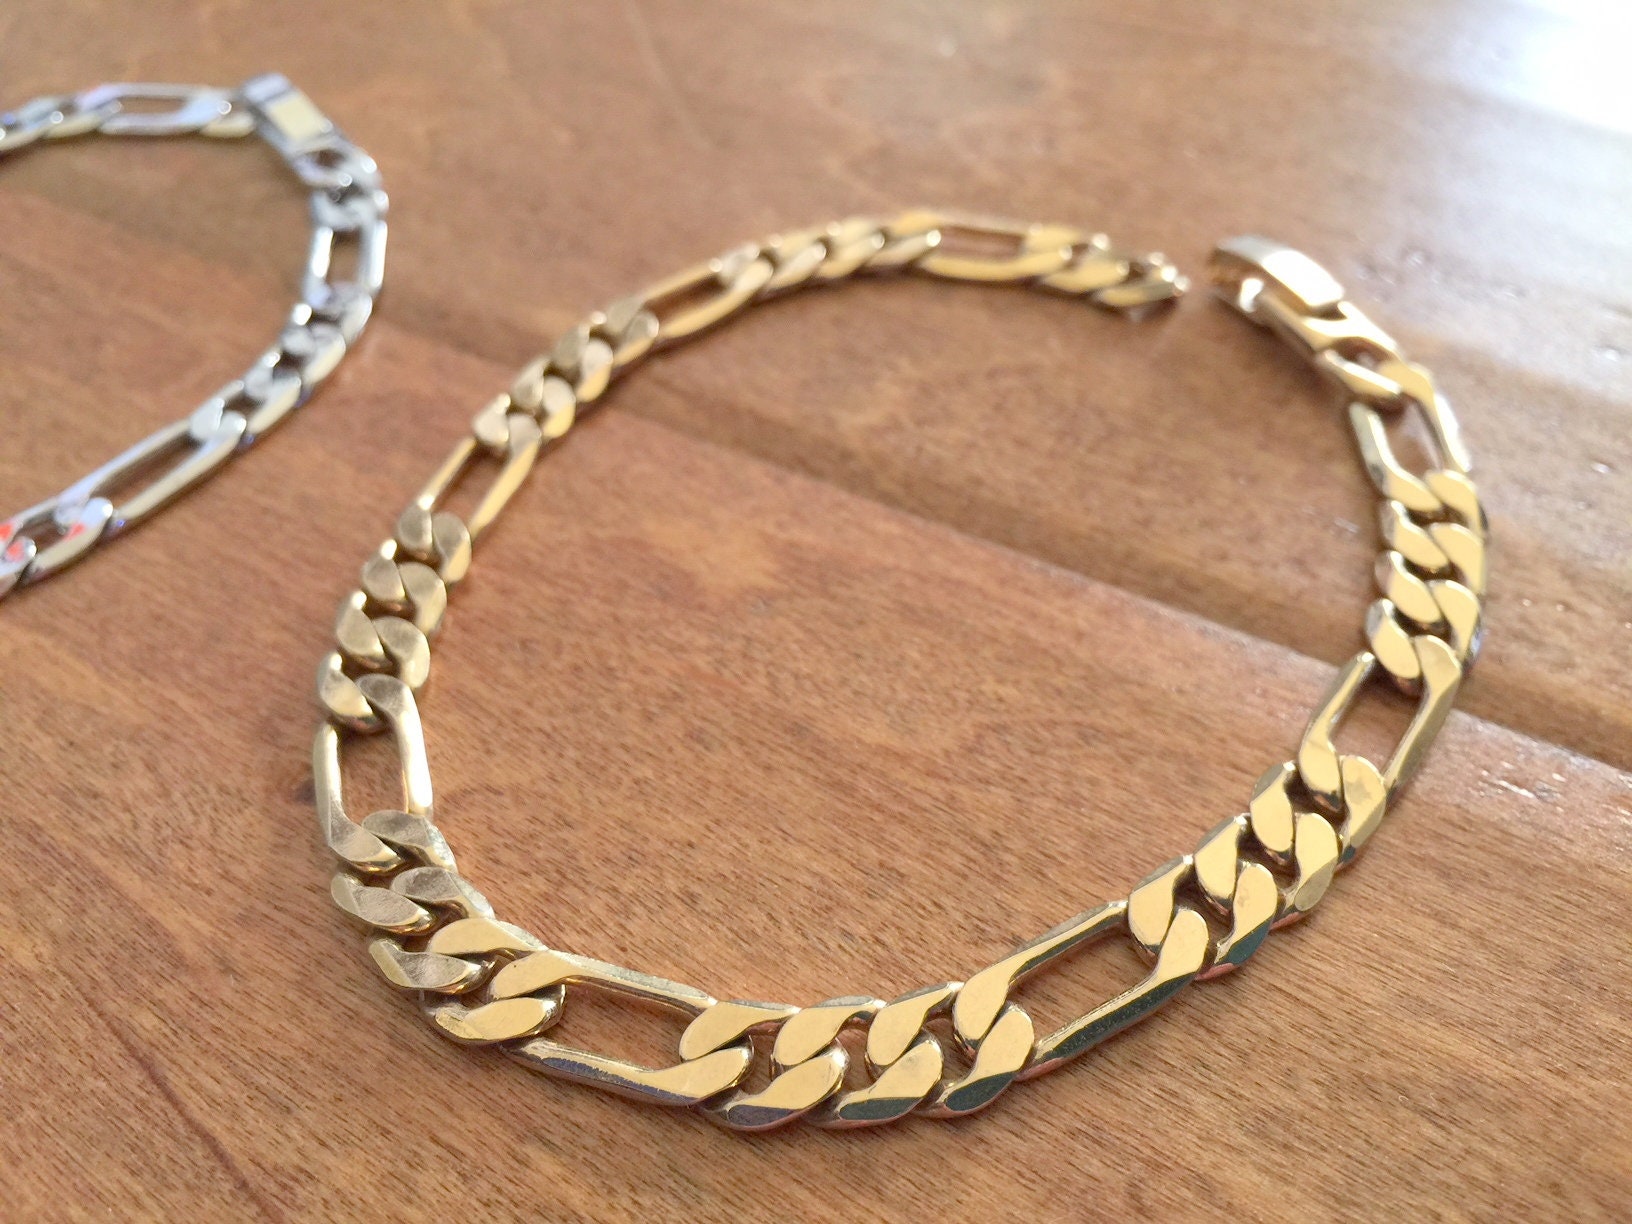 Women's Classic Figaro Chain Bracelet in 14k Real Gold – NORM JEWELS